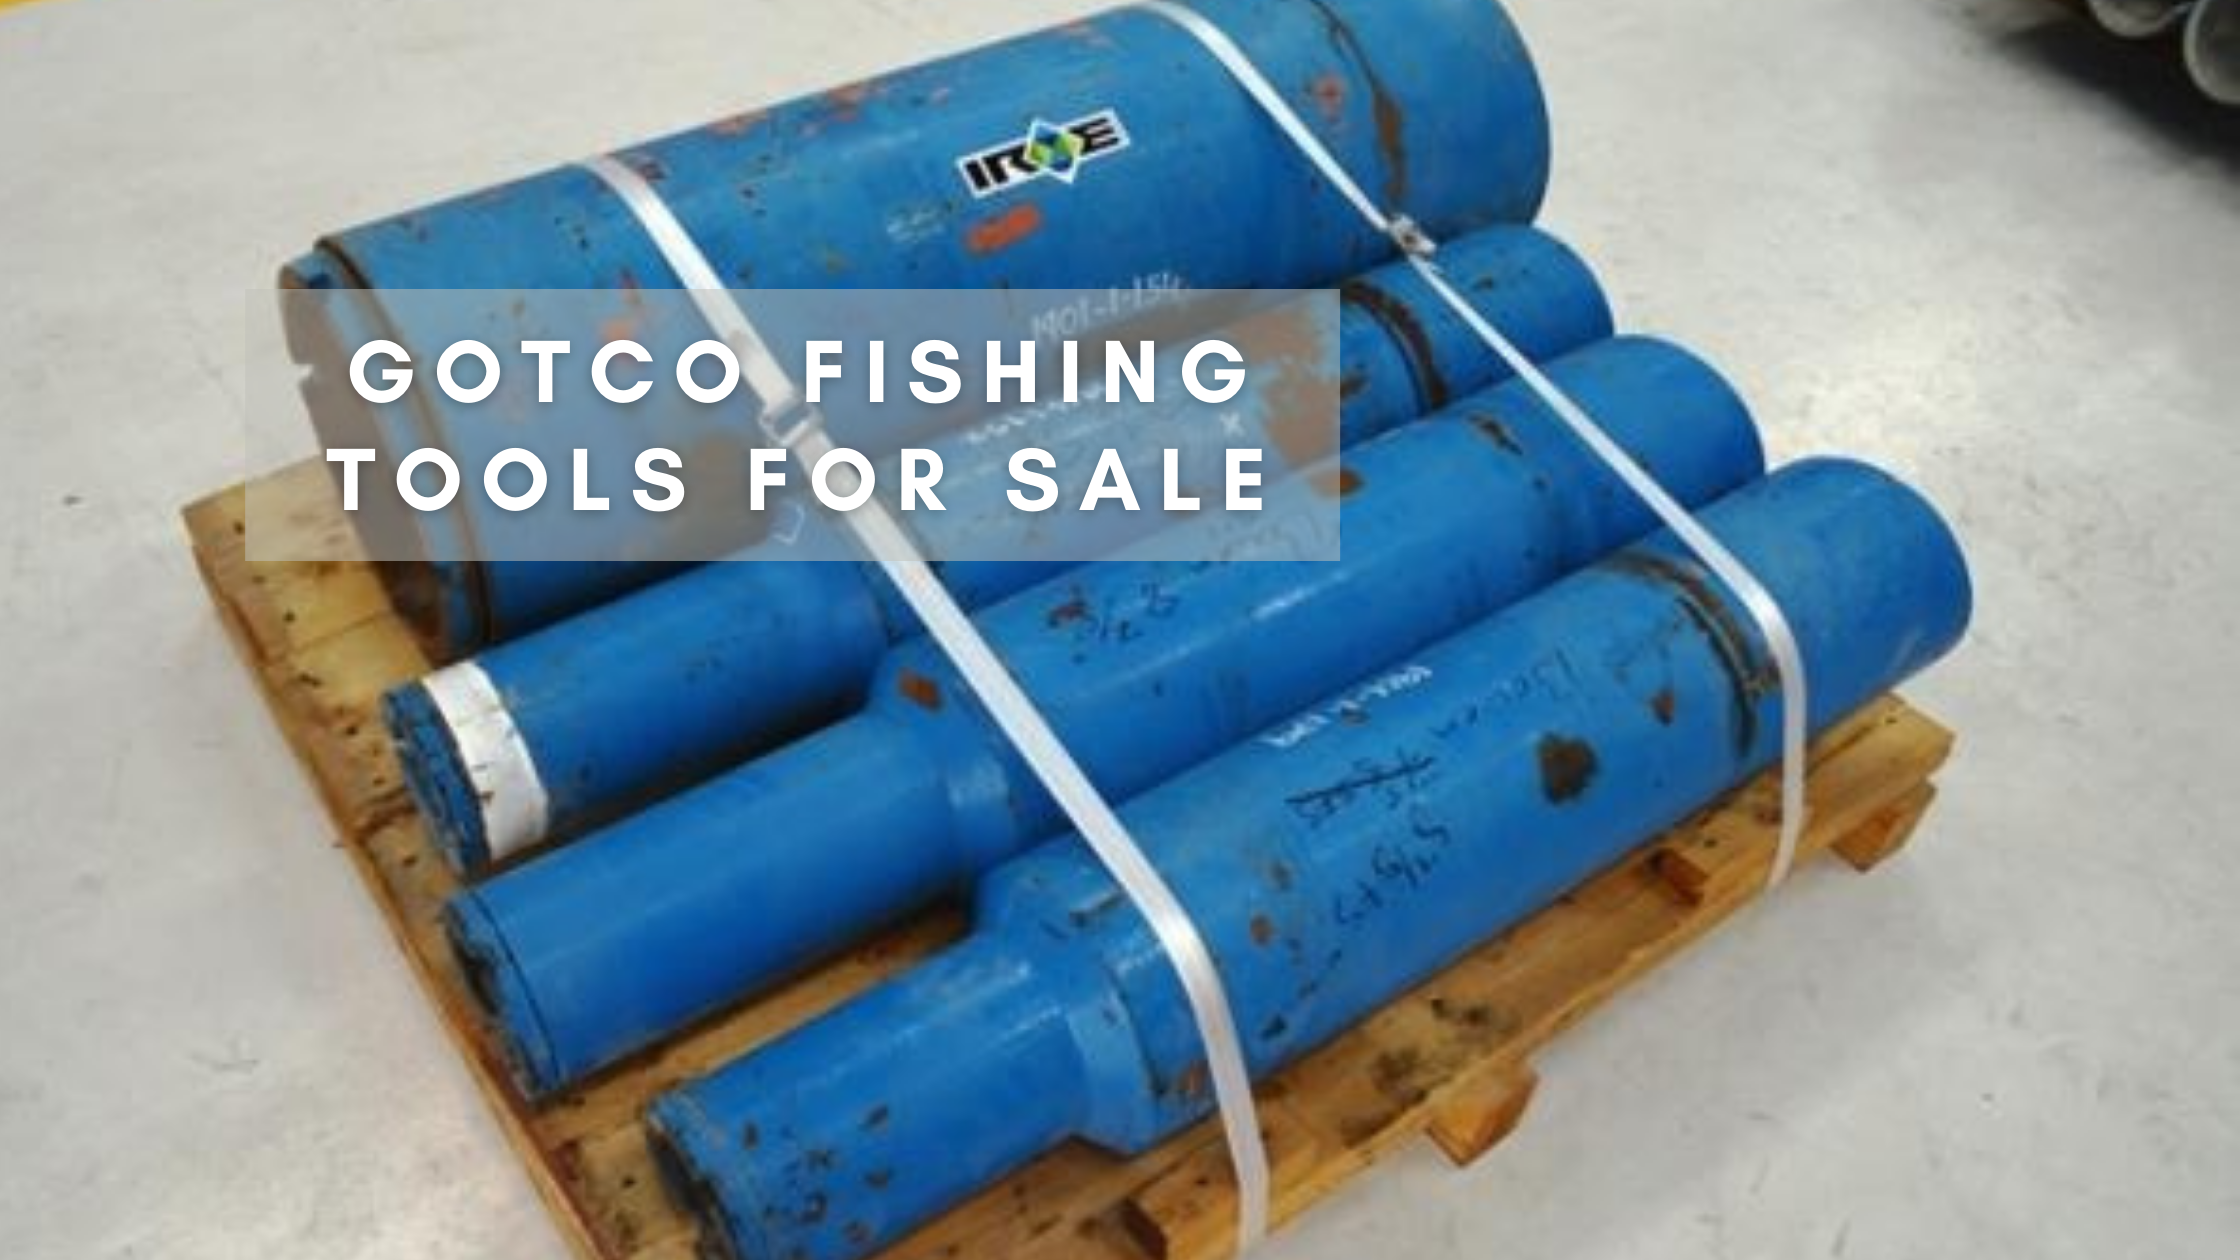 GOTCO Fishing Tools for Sale - Unused and Available From Stock